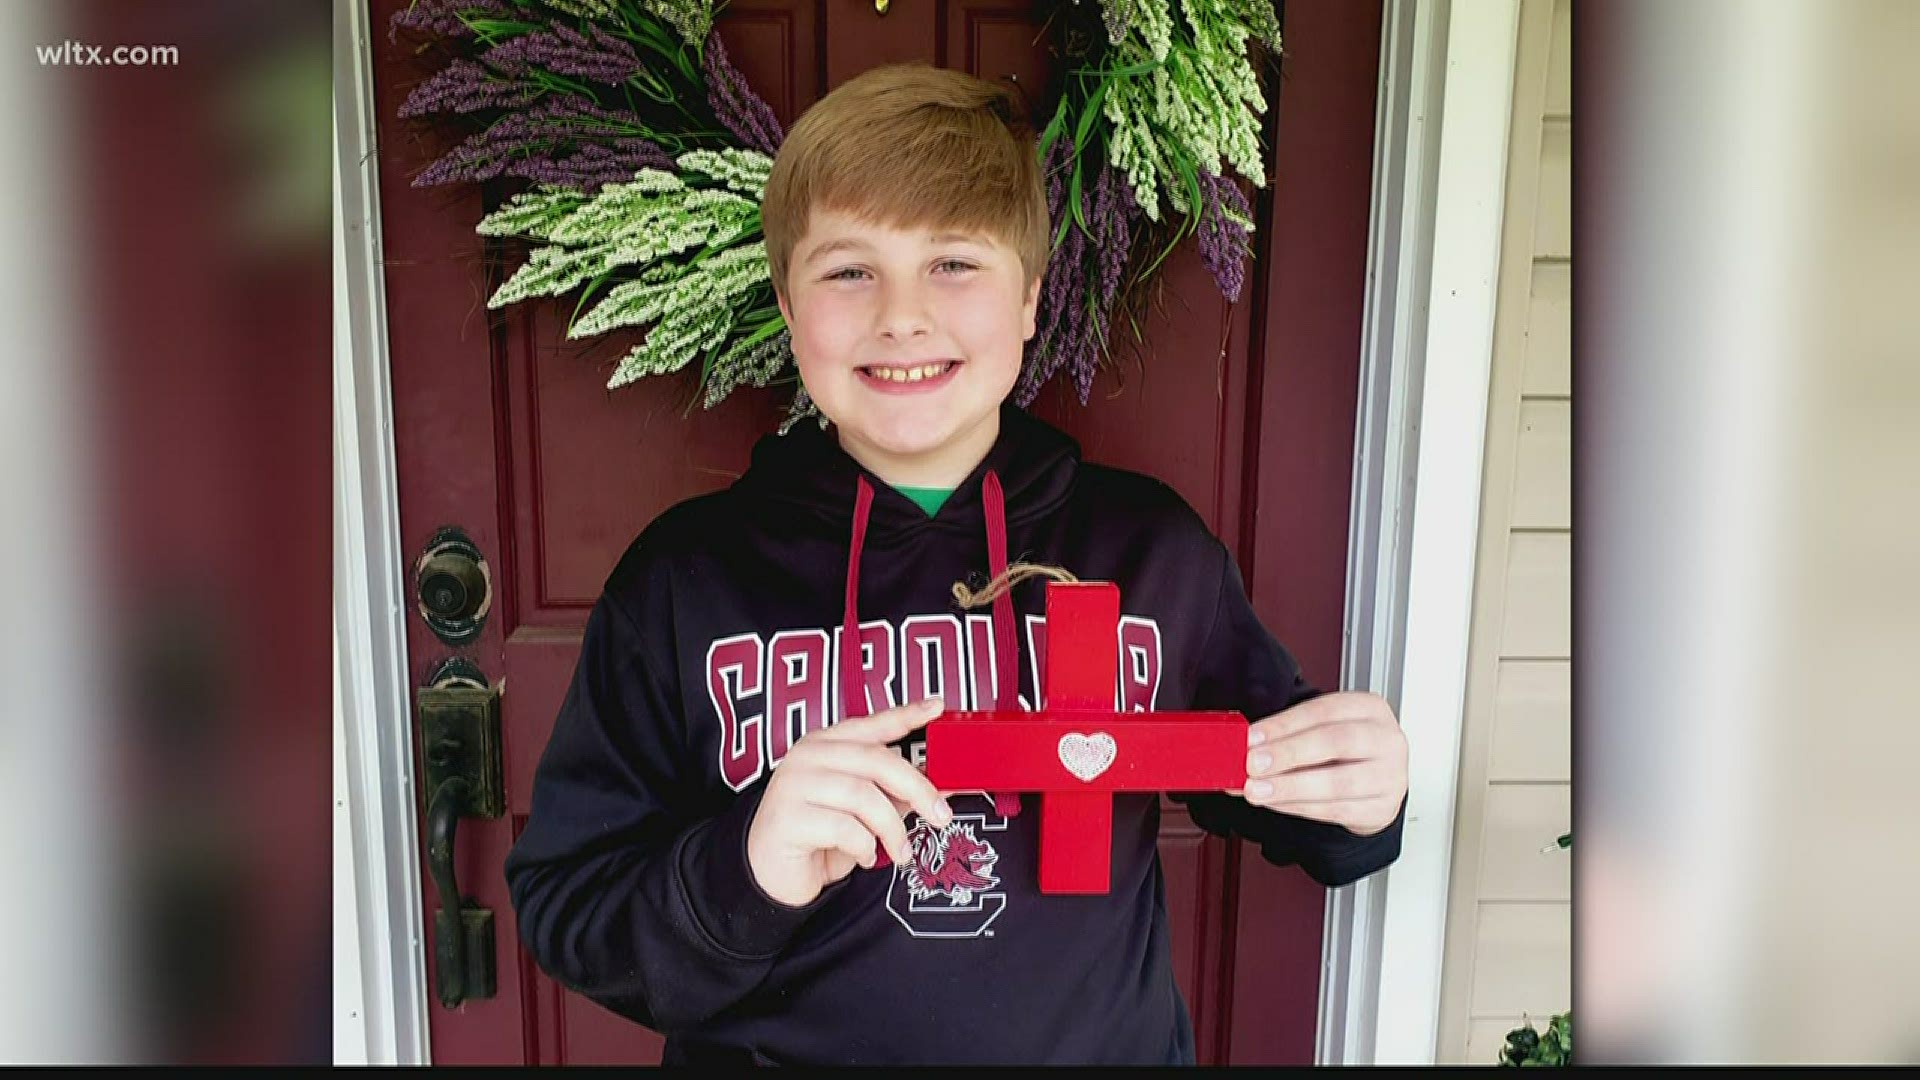 A Midlands 5th-grader is making red wooden crosses to support healthcare workers and first responders.